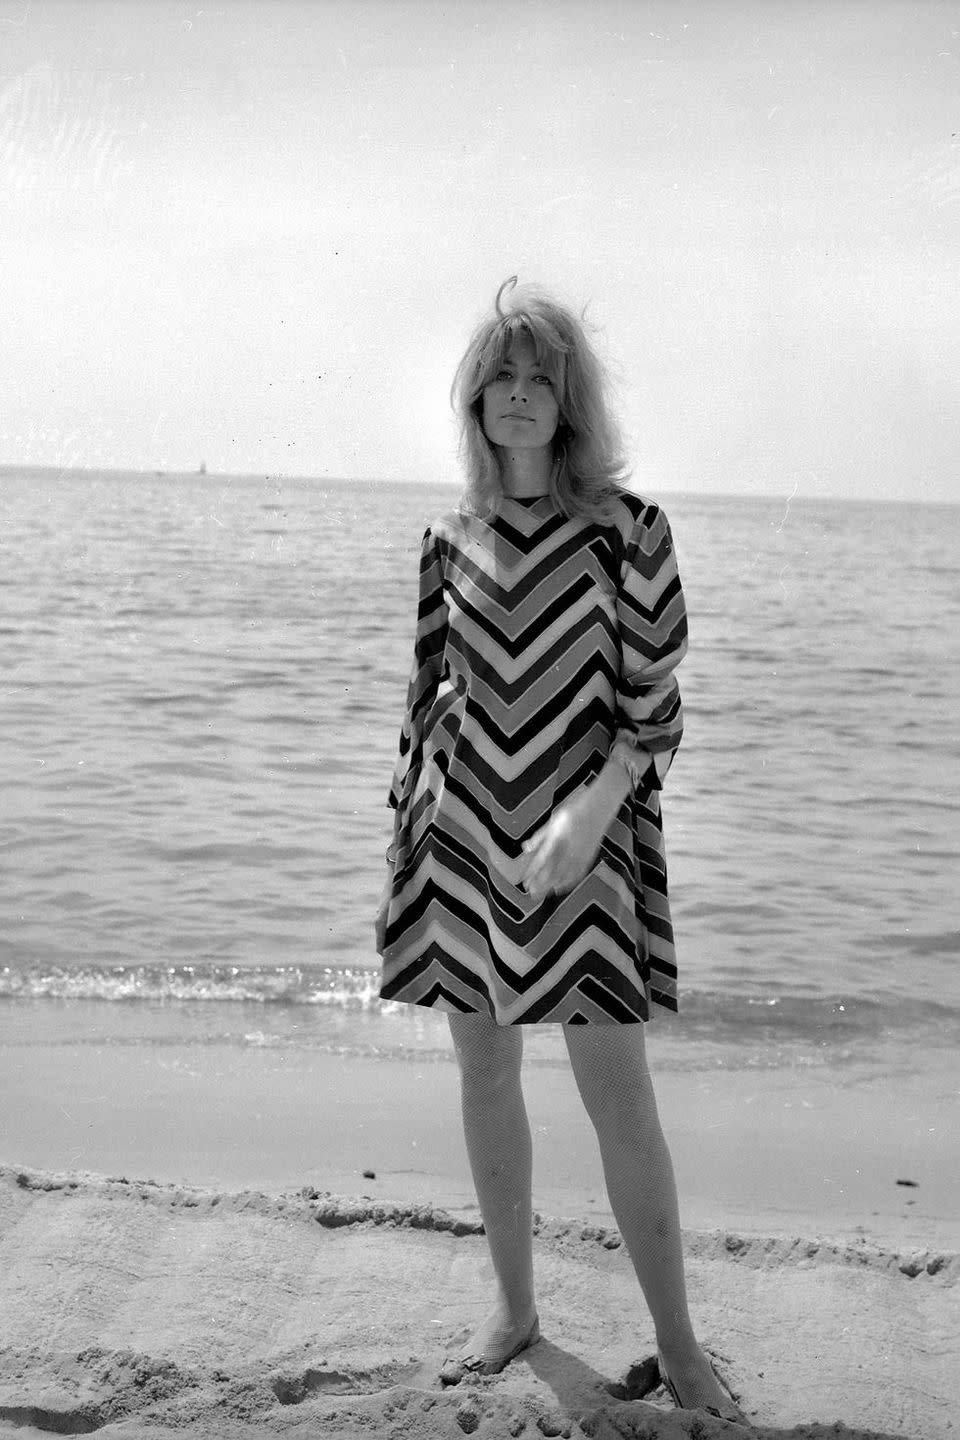 80 Vintage Photos of Celebrities at the Beach